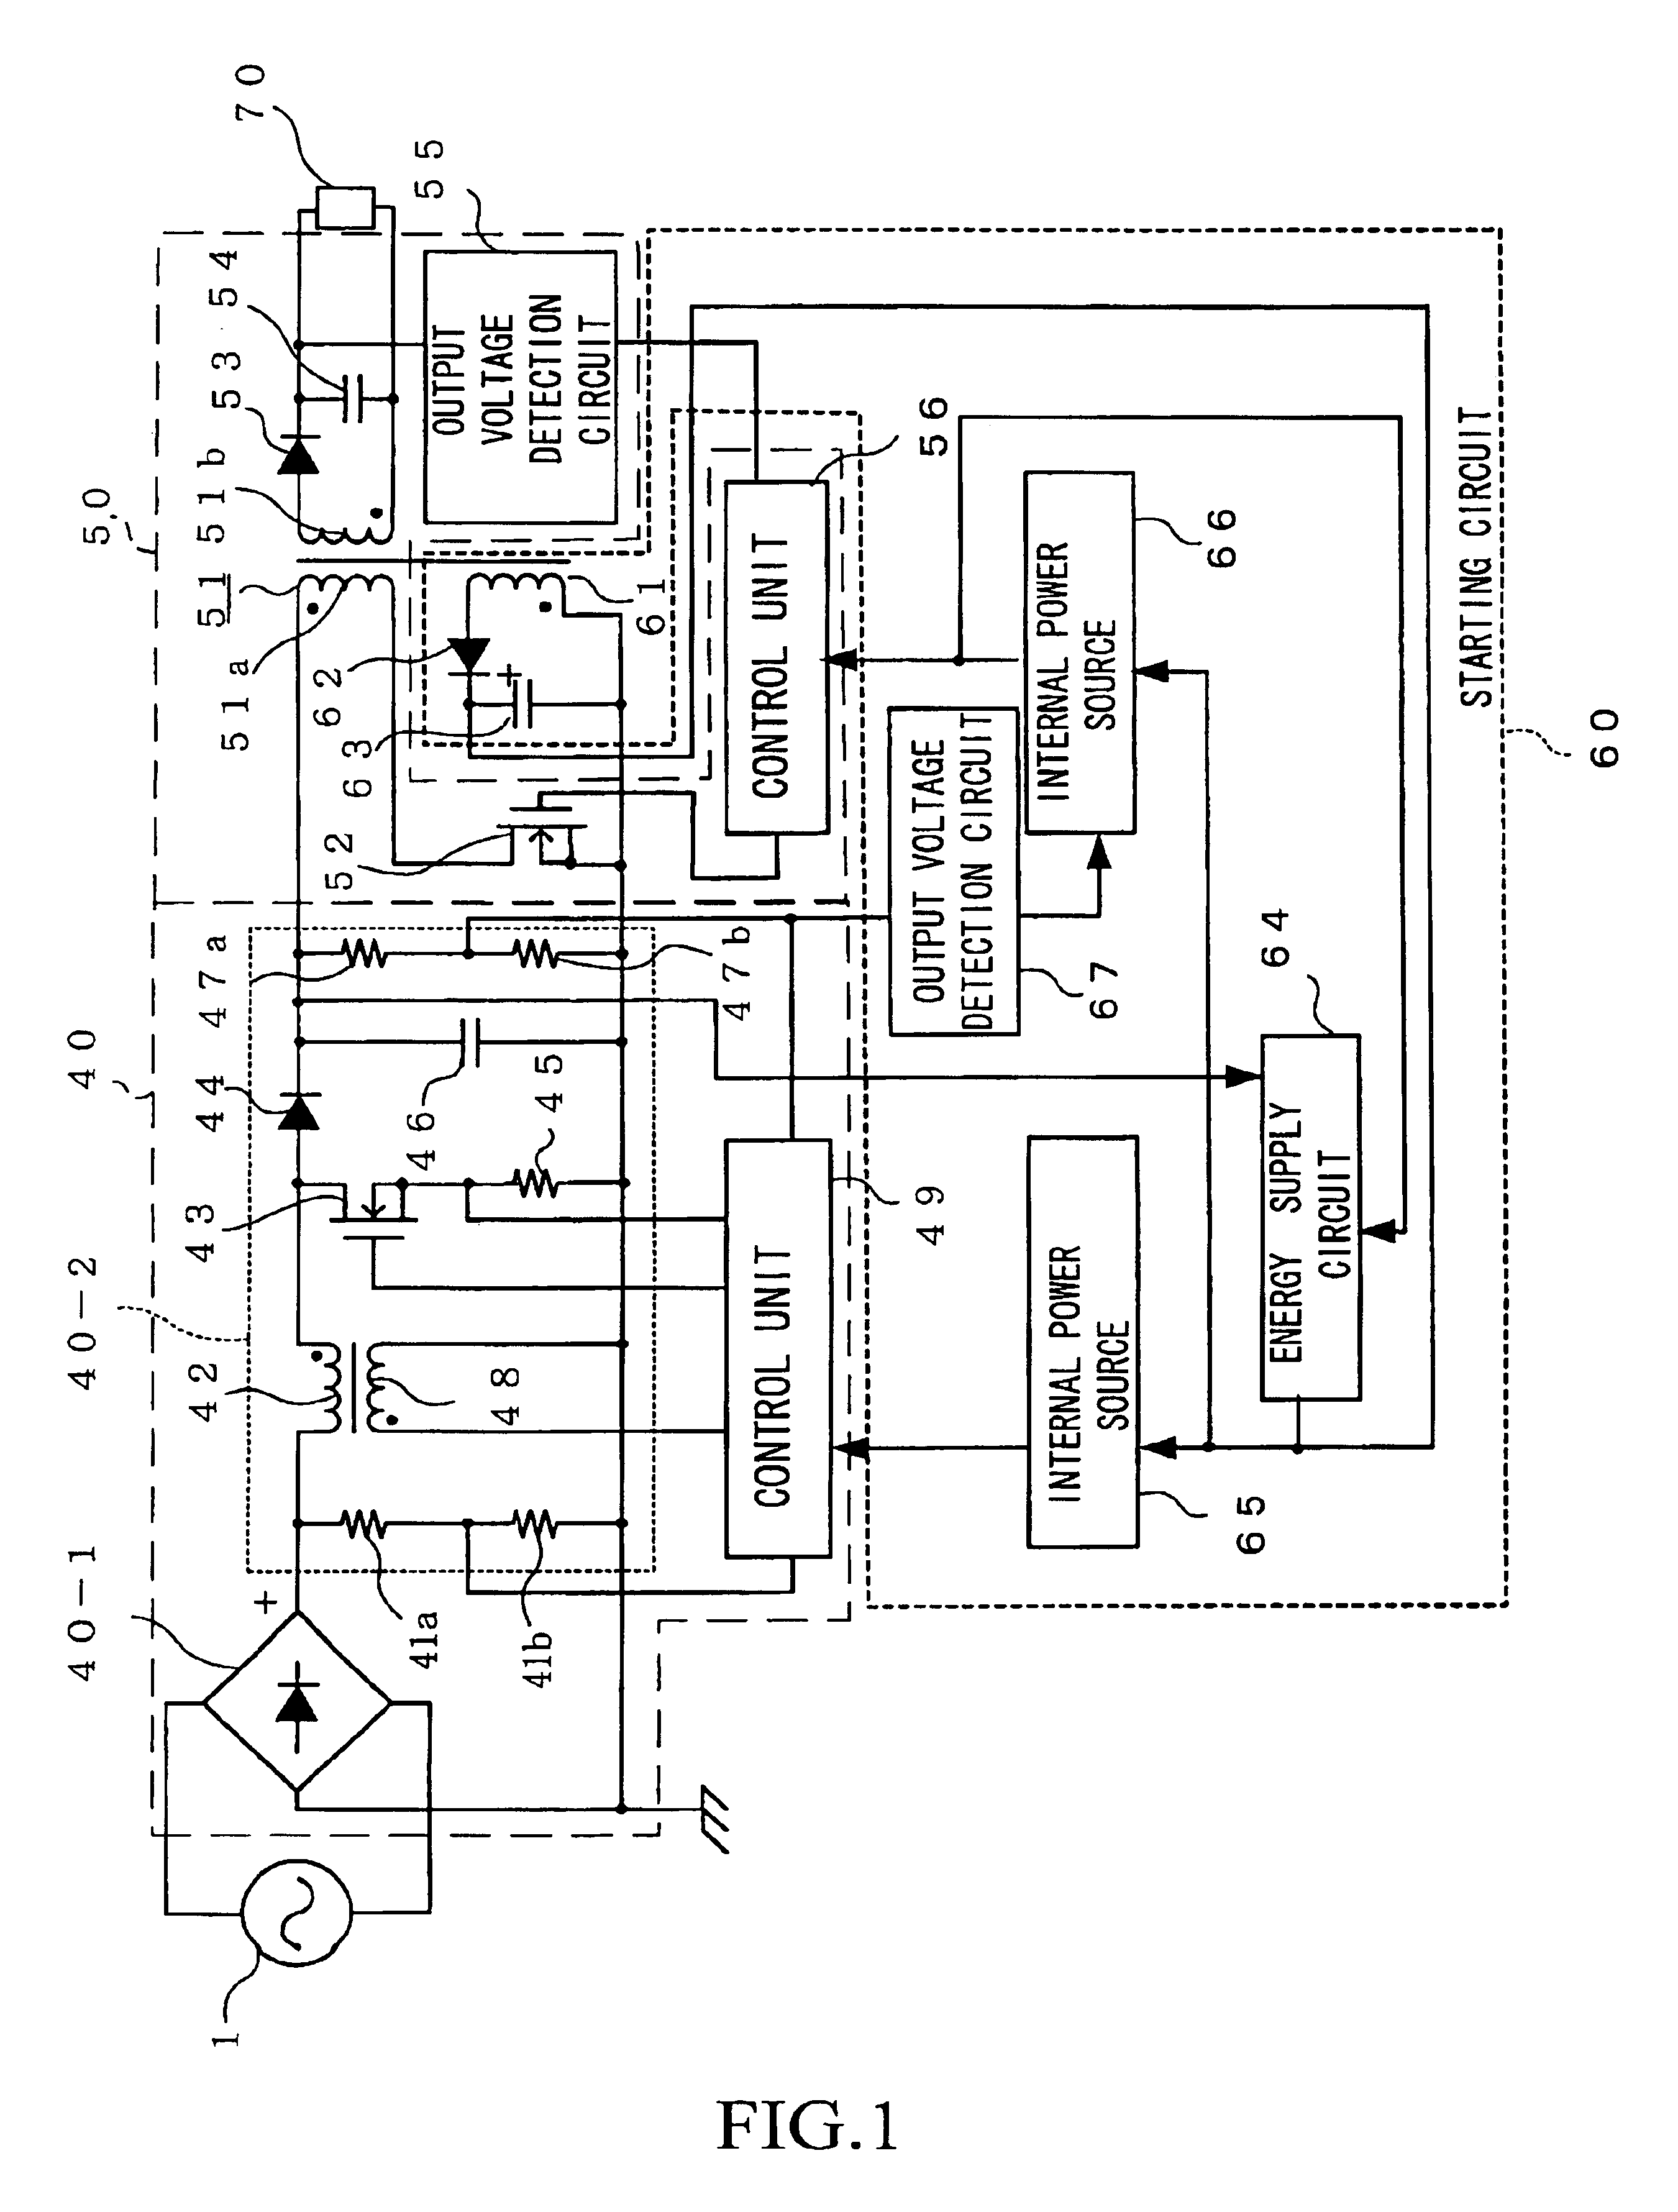 Circuit for starting power source apparatus